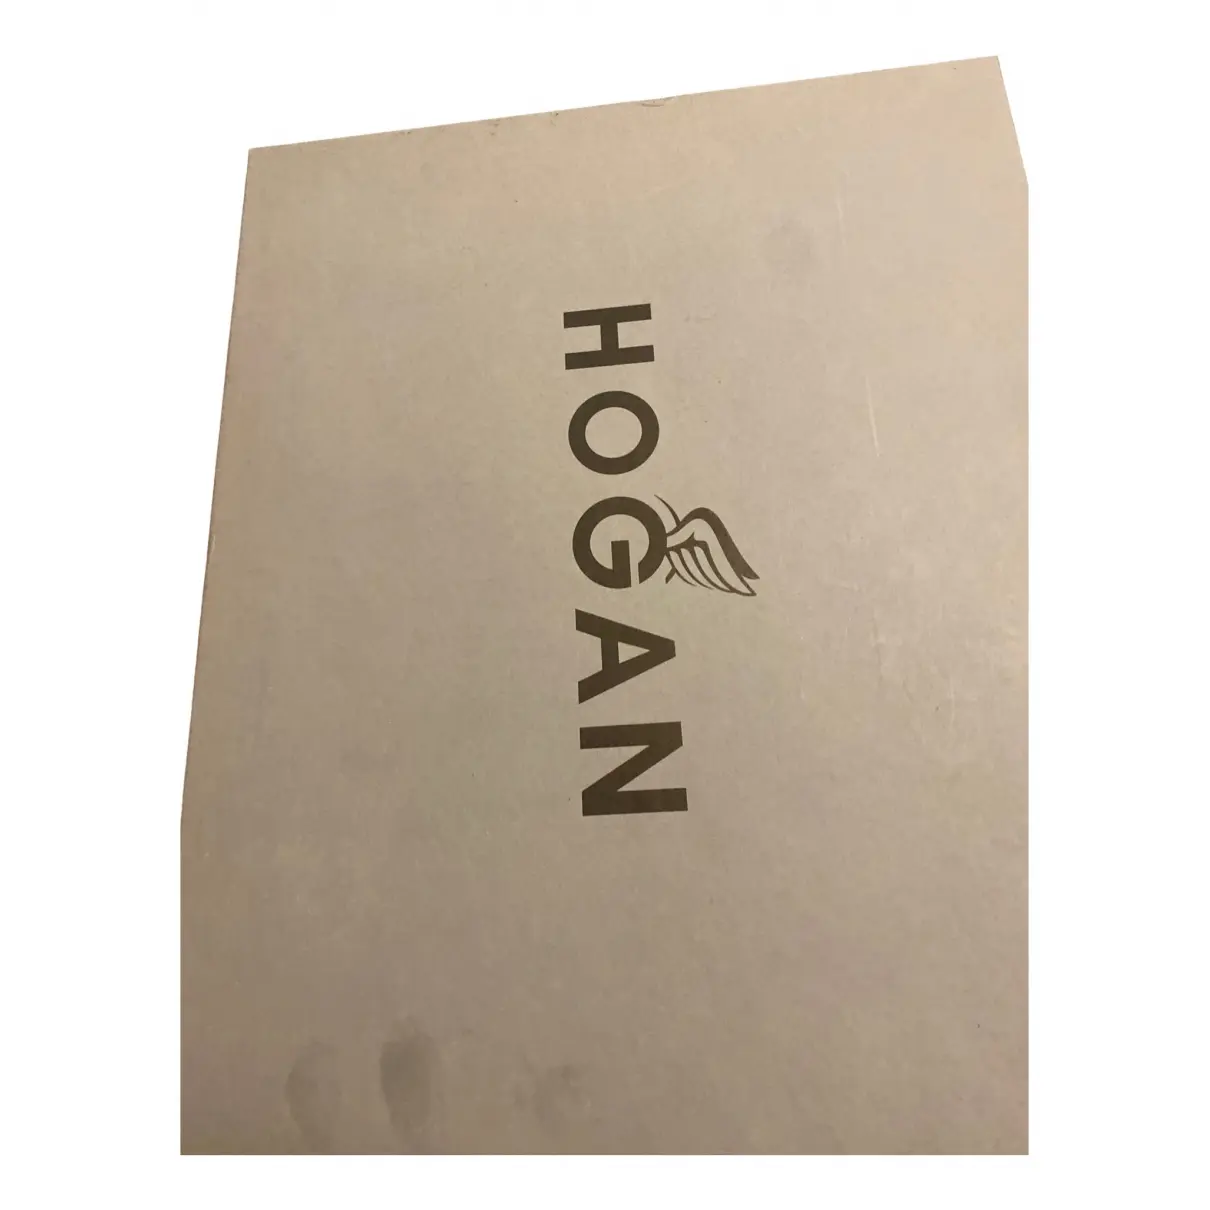 Buy Hogan Leather ankle boots online